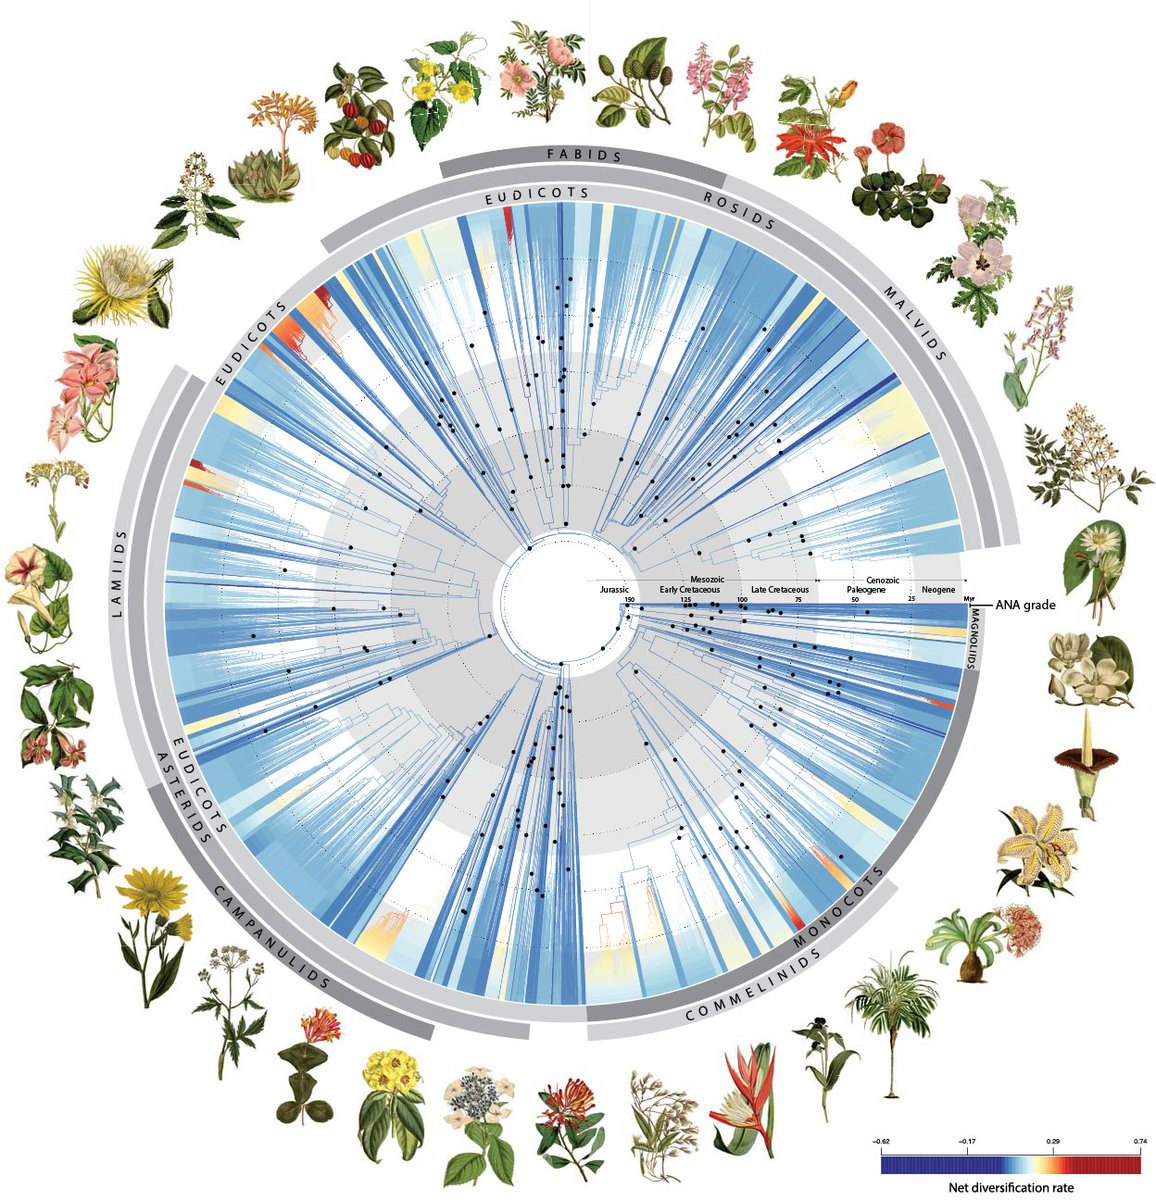 Our Big Flowering Plant Bang paper is now out in Nature!! So excited to have been part of this massive collaborative effort led by the @kewgardens team, involving 279 co-authors from 27 countries! #angiosperms #phylogenomics nature.com/articles/s4158…